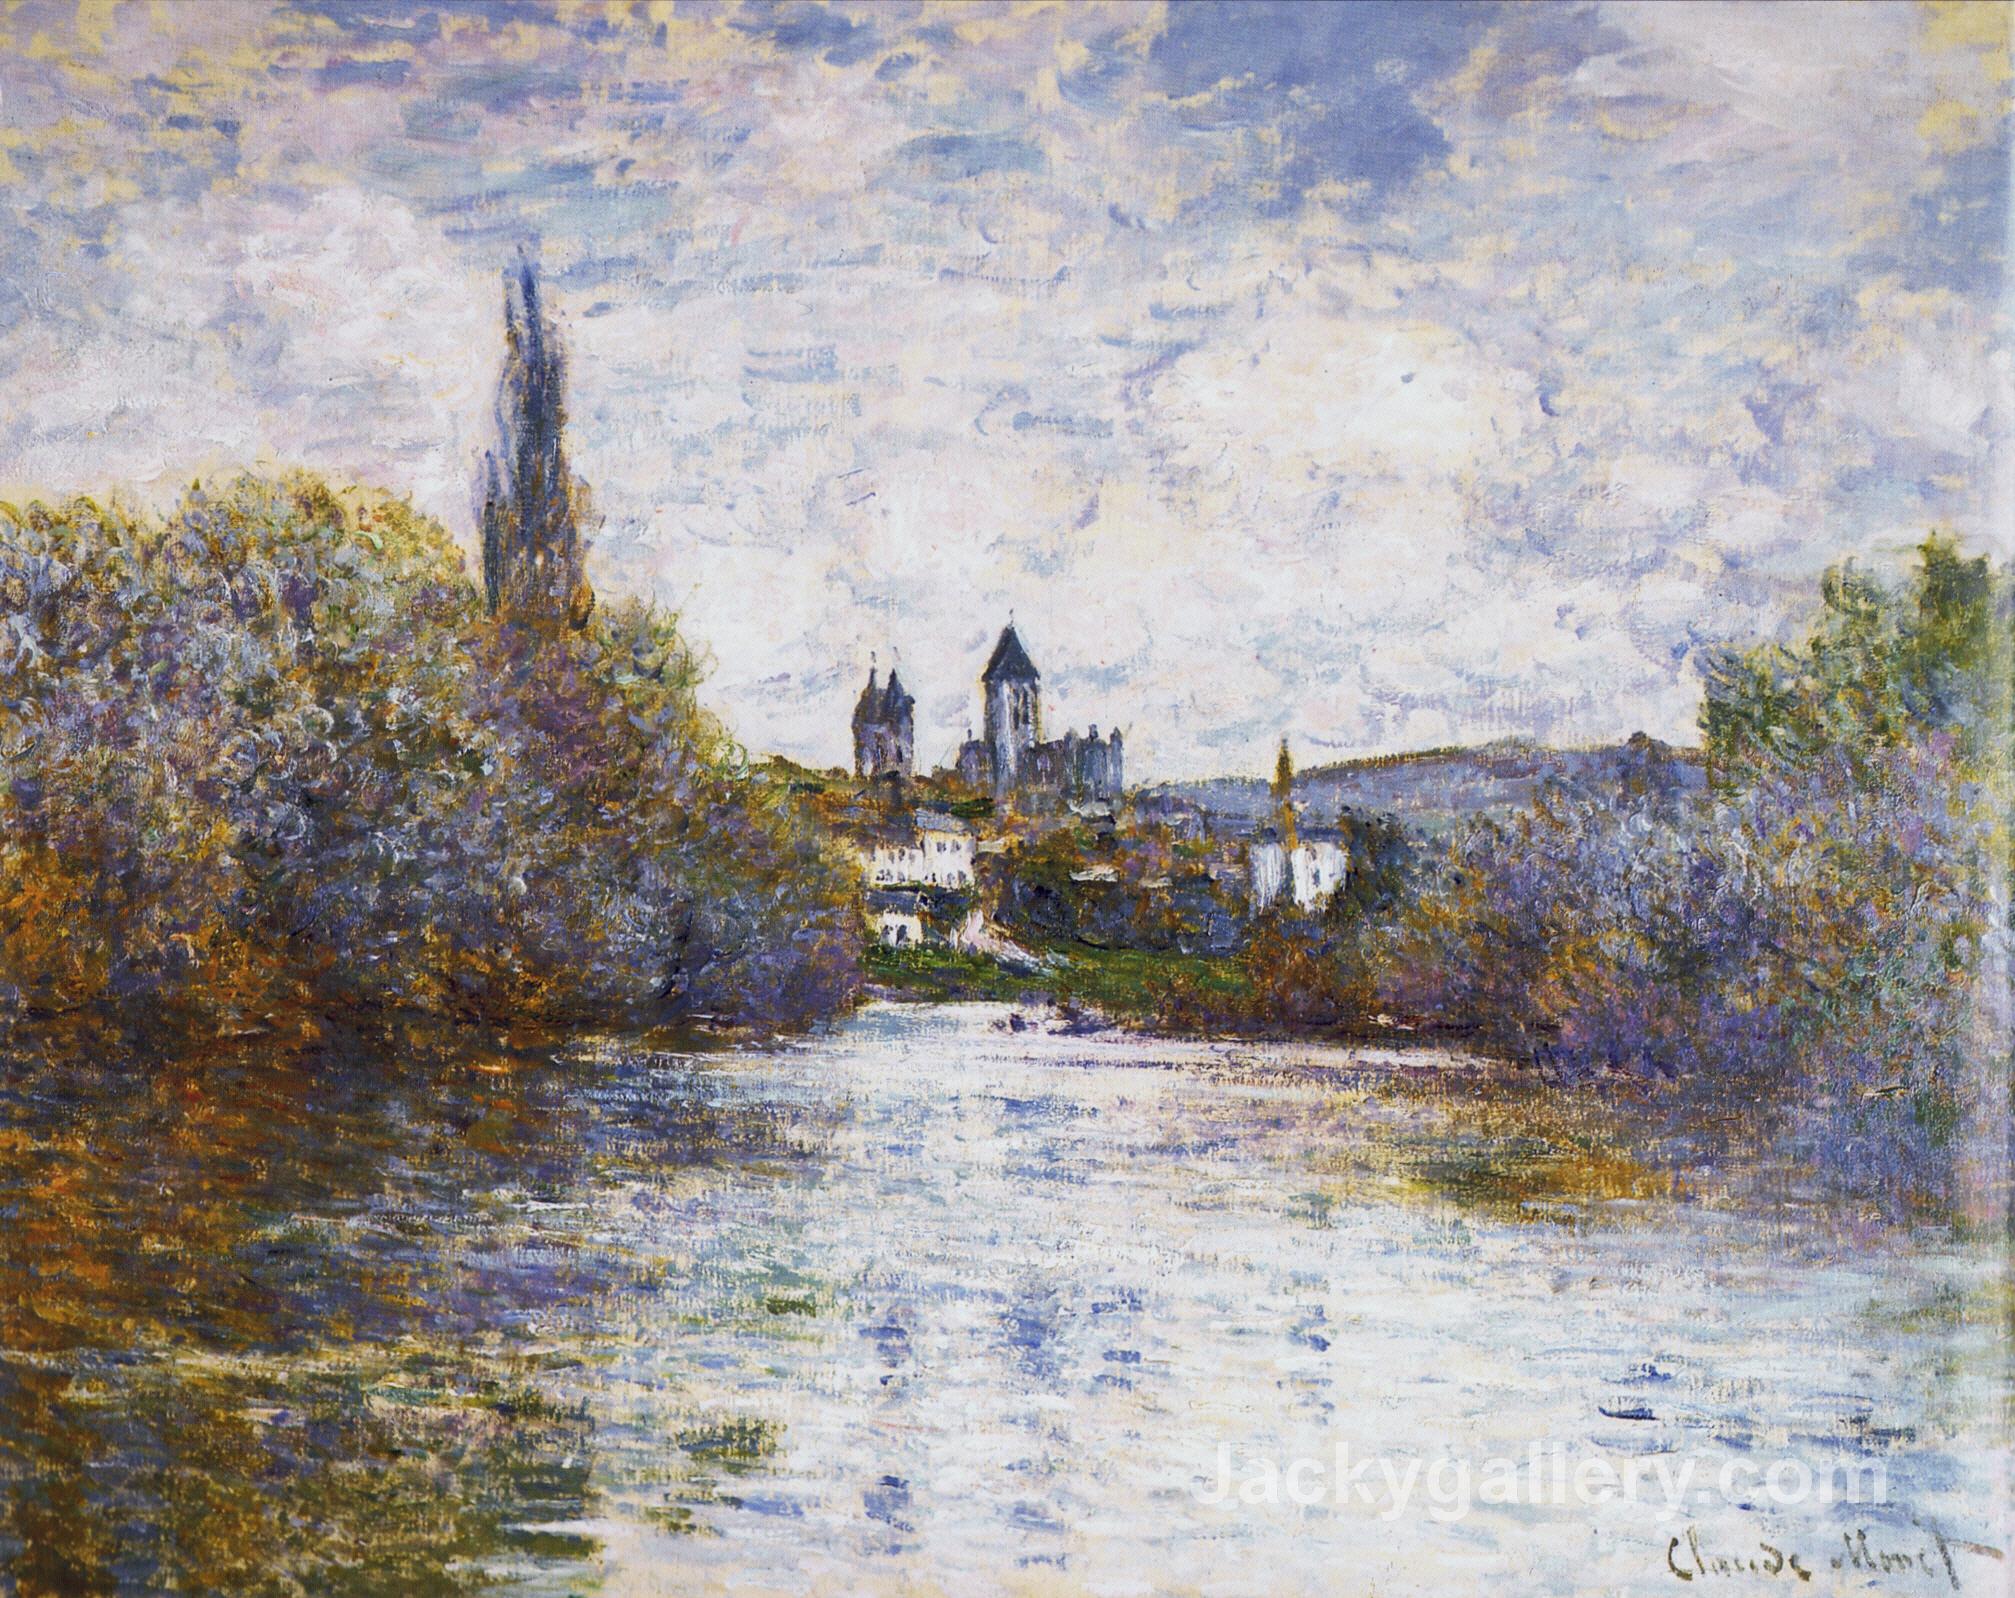 Vetheuil, The Small Arm of the Seine by Claude Monet paintings reproduction